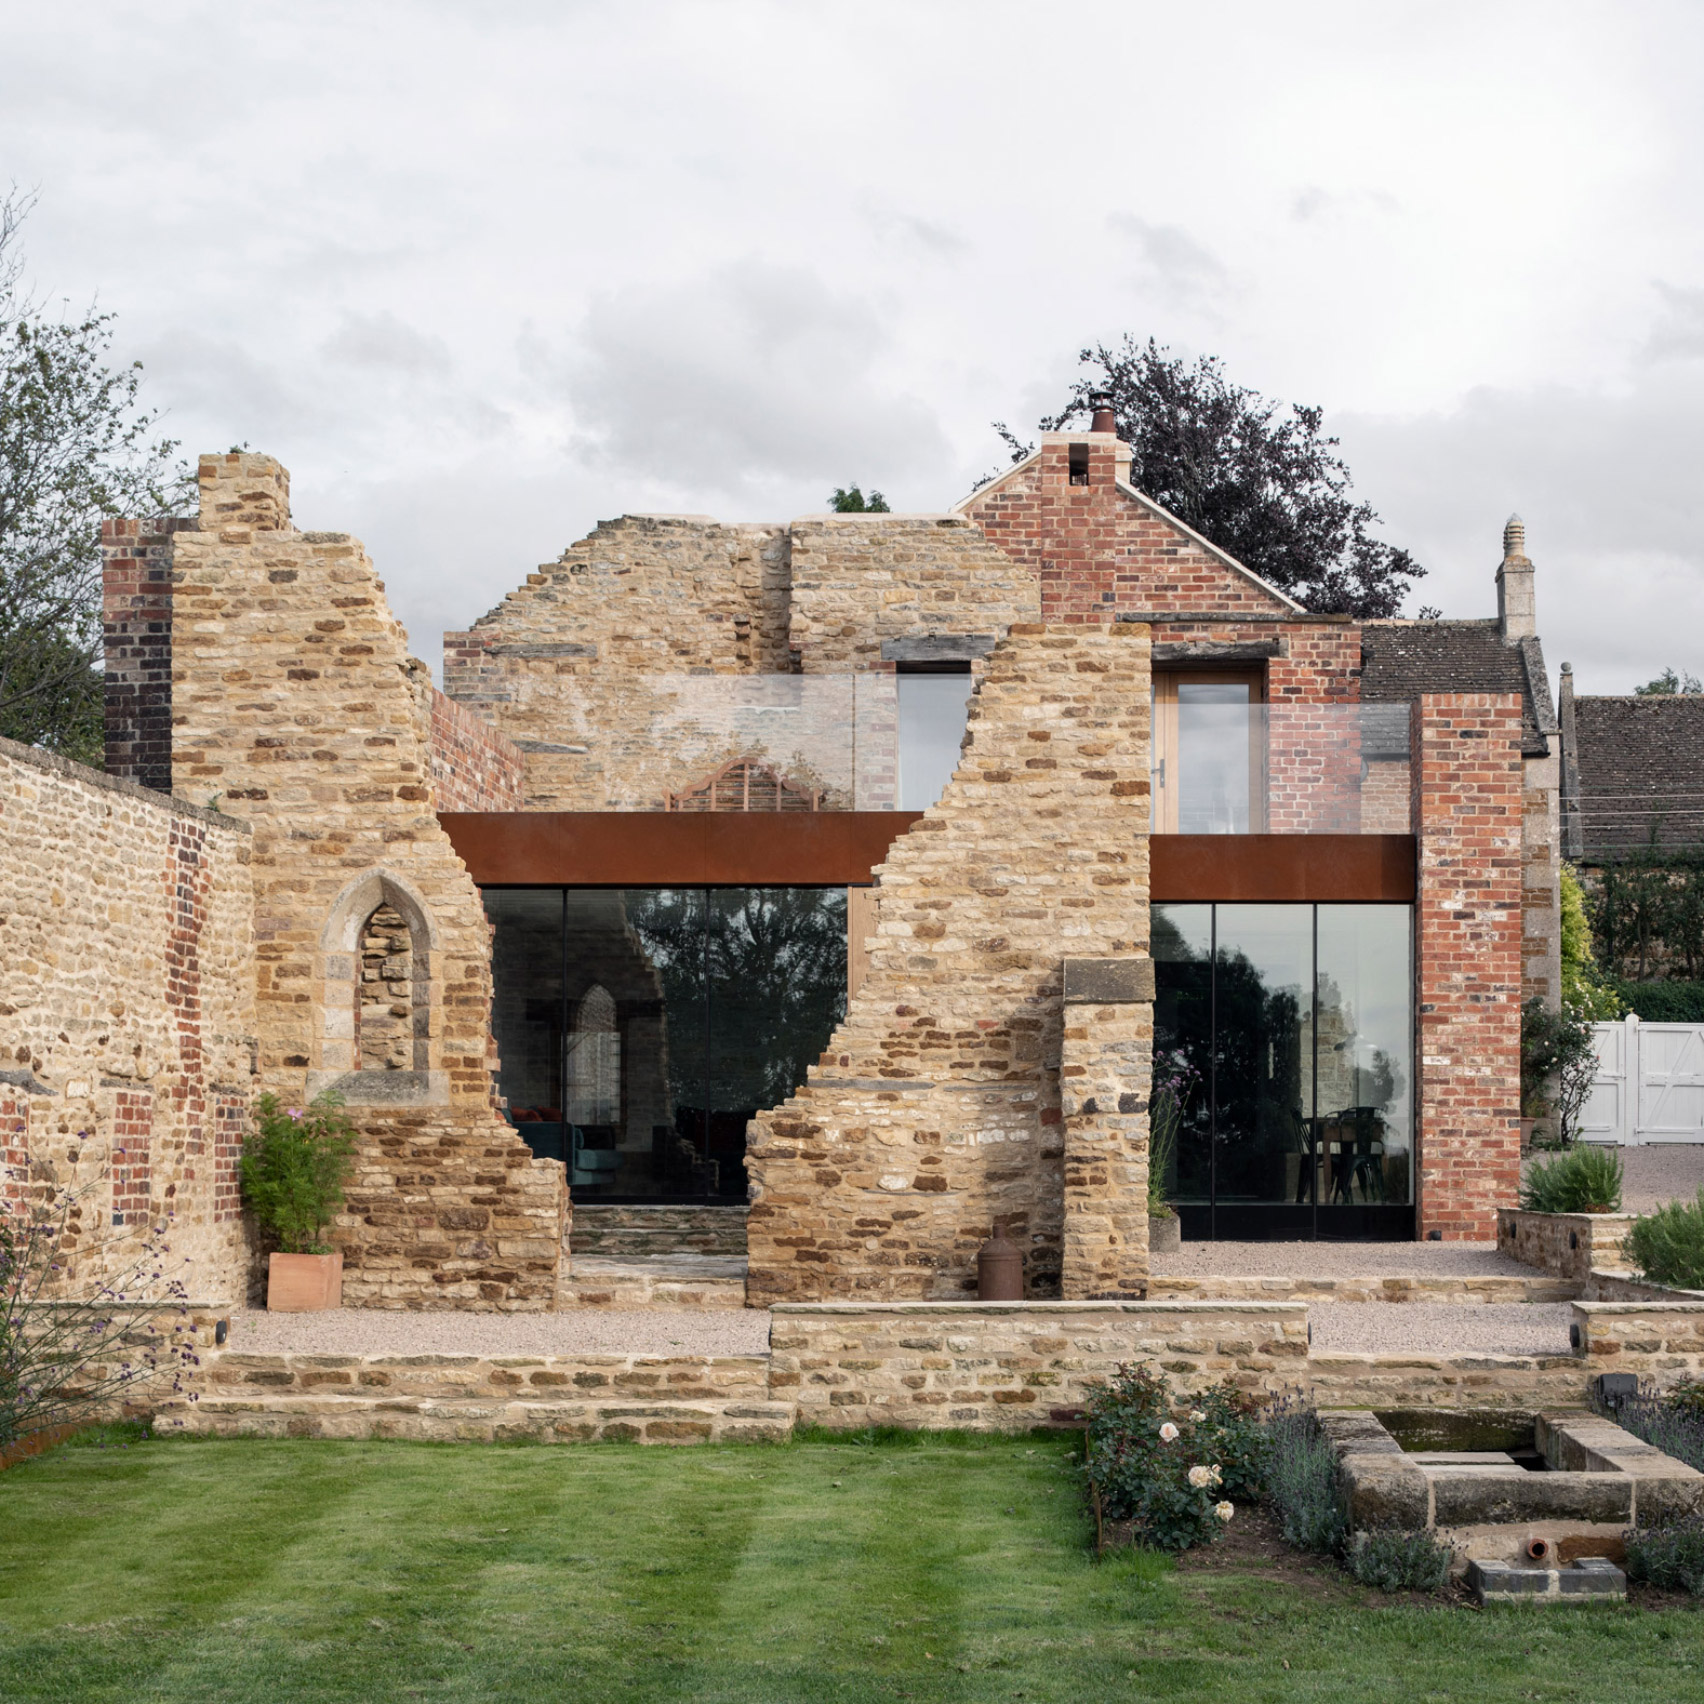 Top 10 British architecture projects of 2020: The Parchment Works by Will Gamble Architects